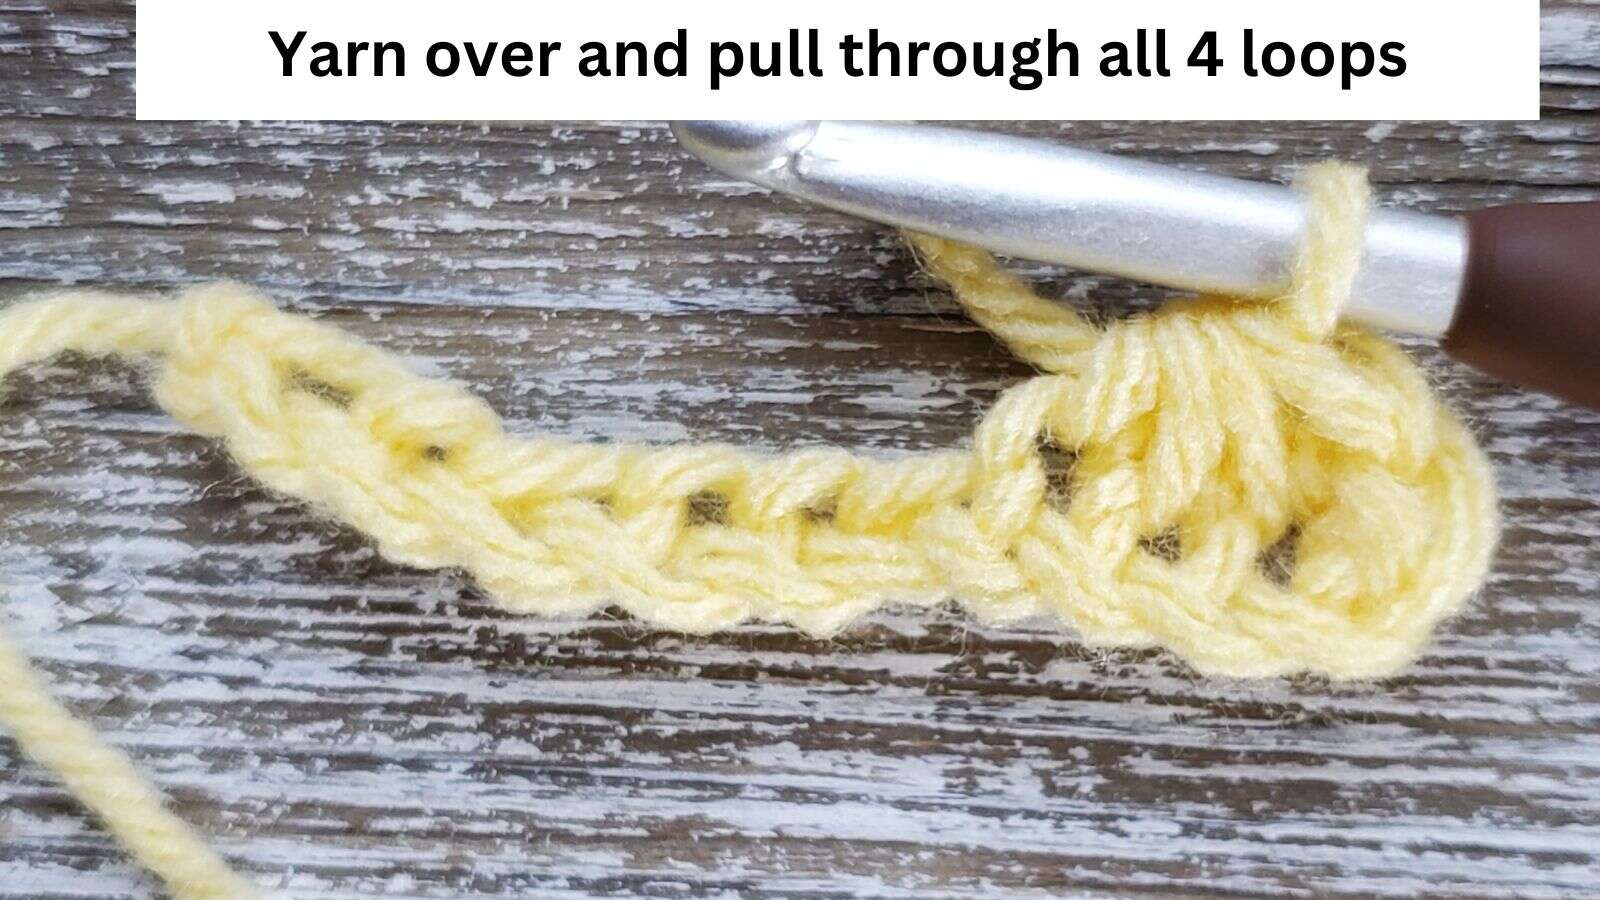 Yarn over and pull through all 4 loops